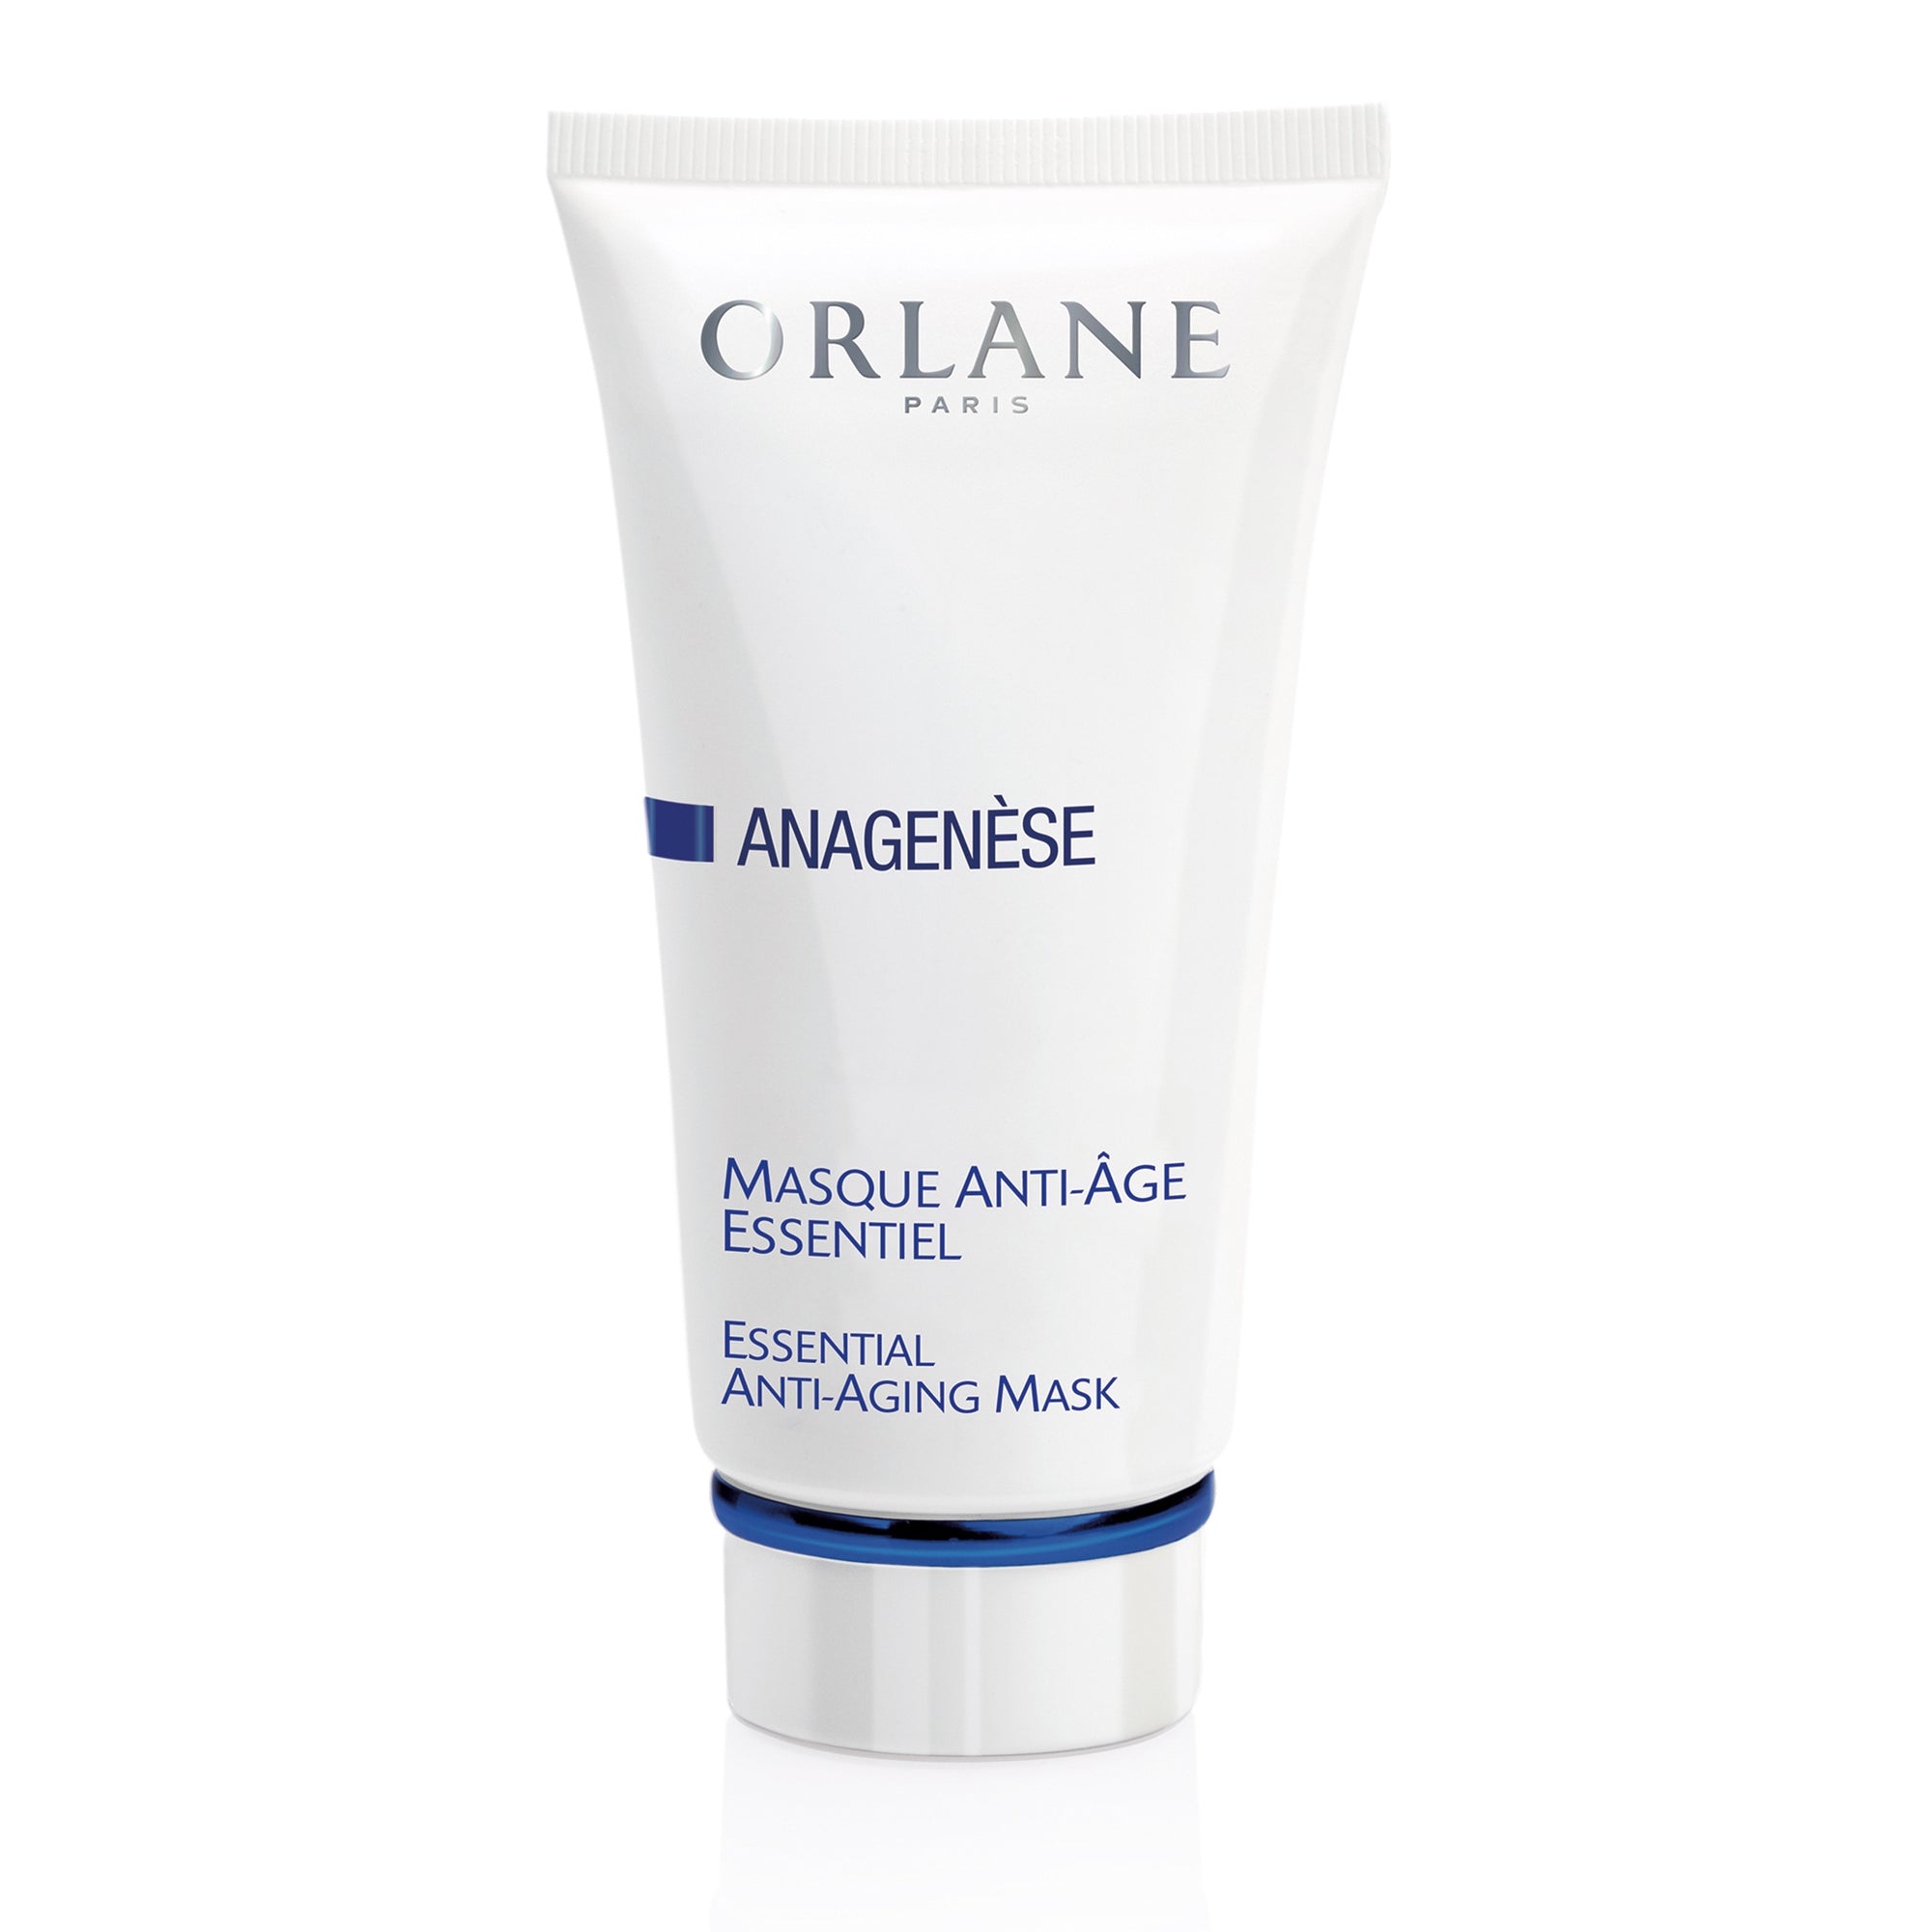 Orlane Anagenese Essential Anti-Aging Mask